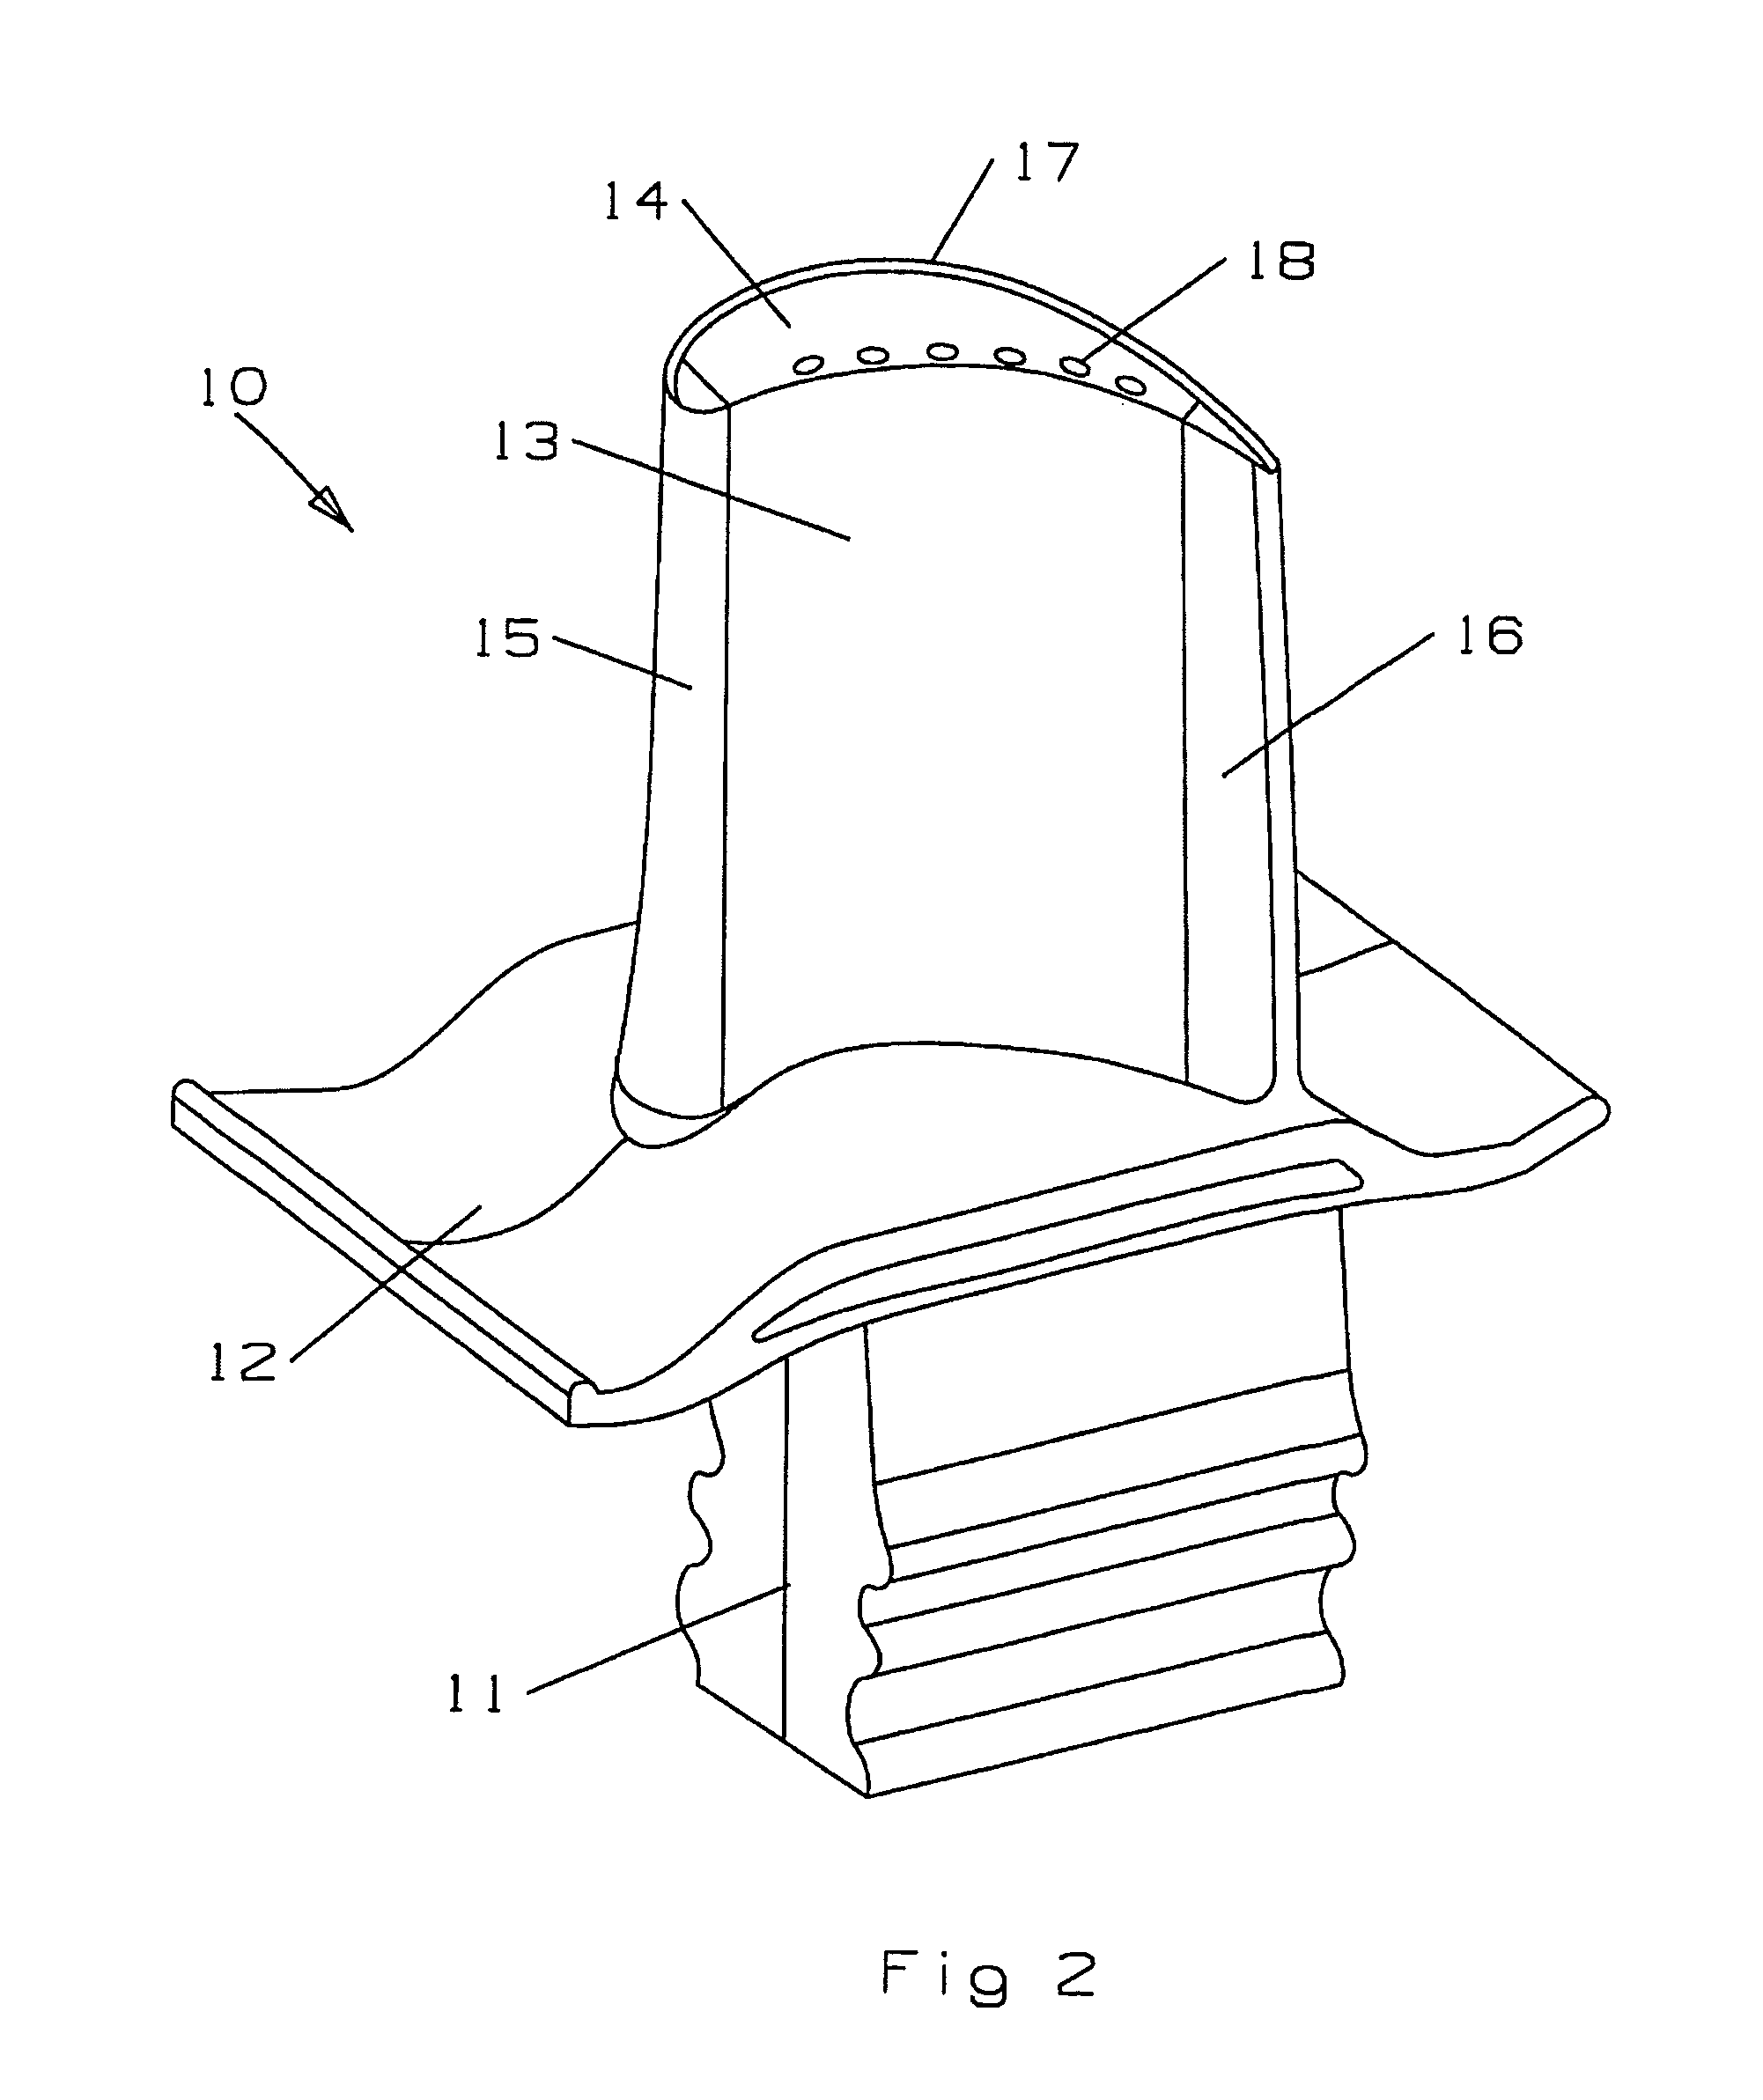 Composite air cooled turbine rotor blade